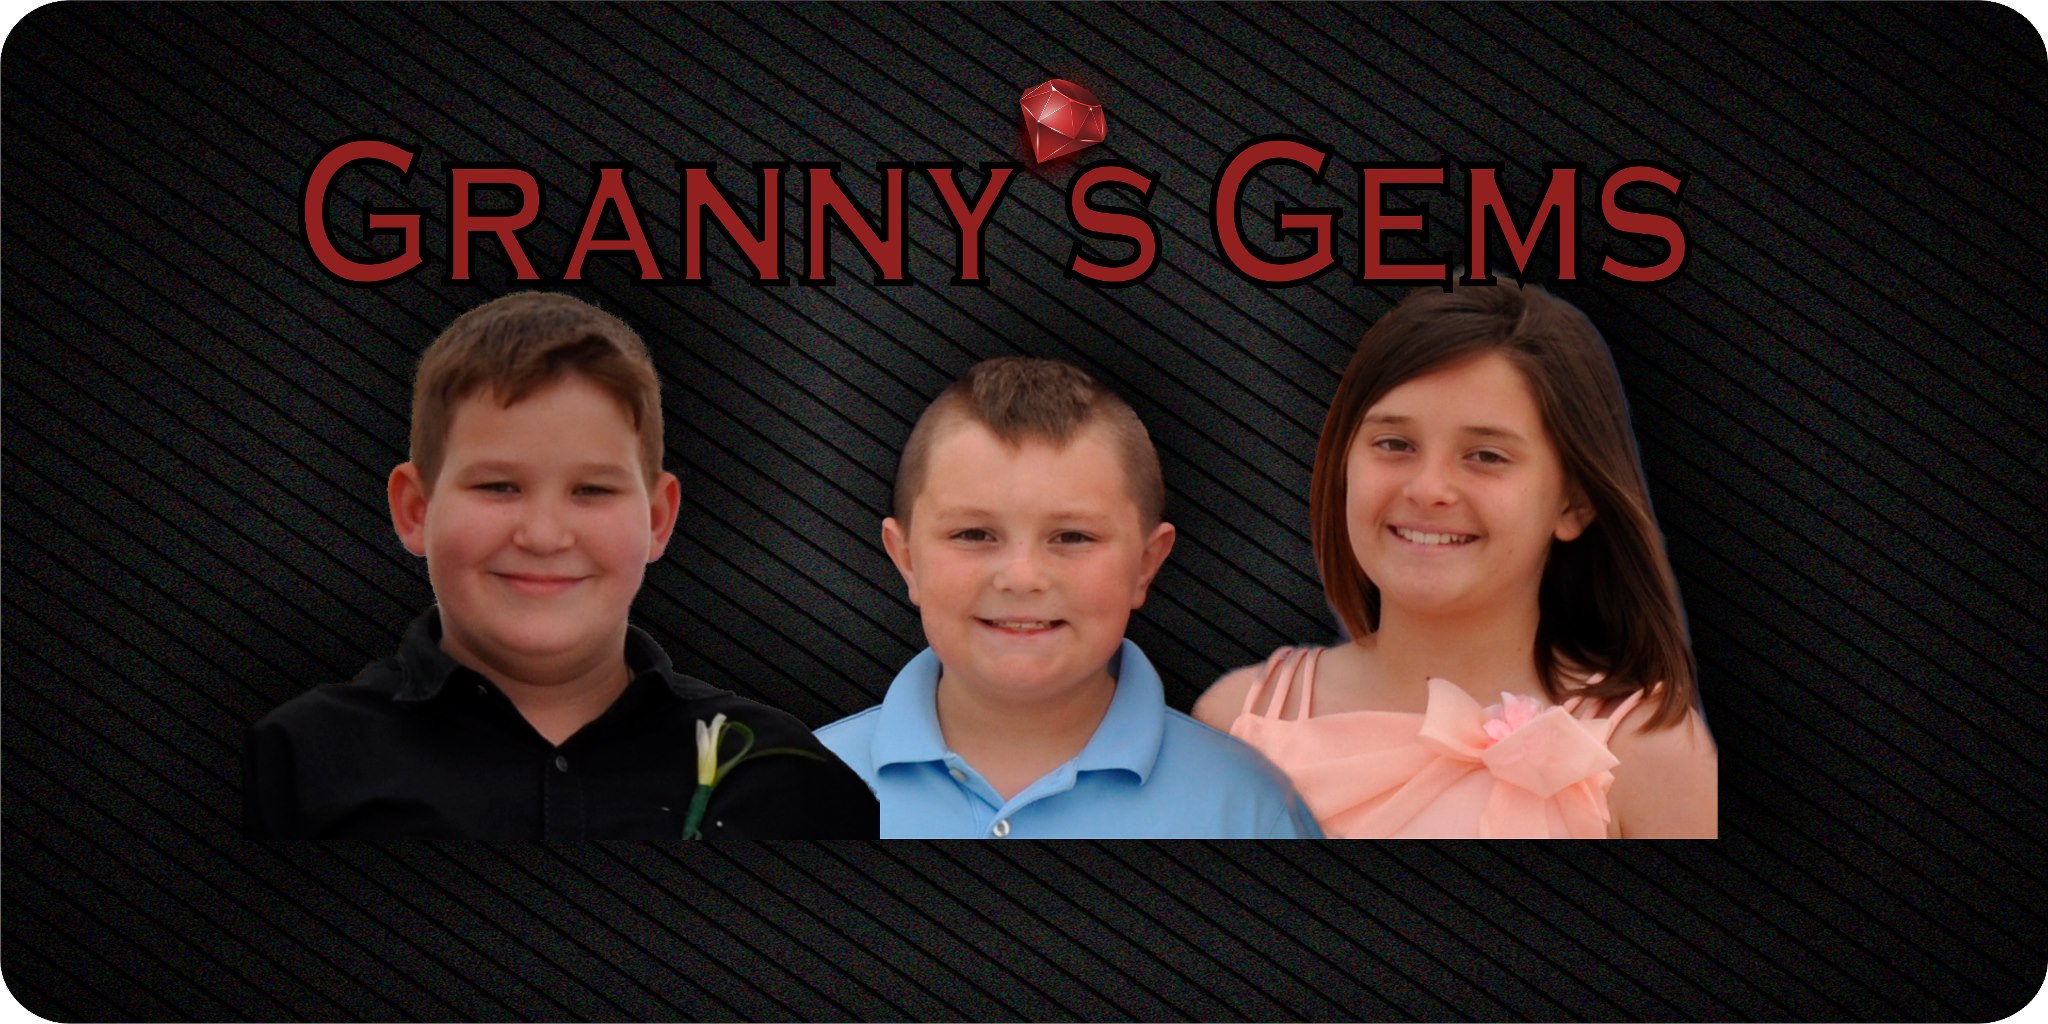 Granny's Gems made with sublimation printing